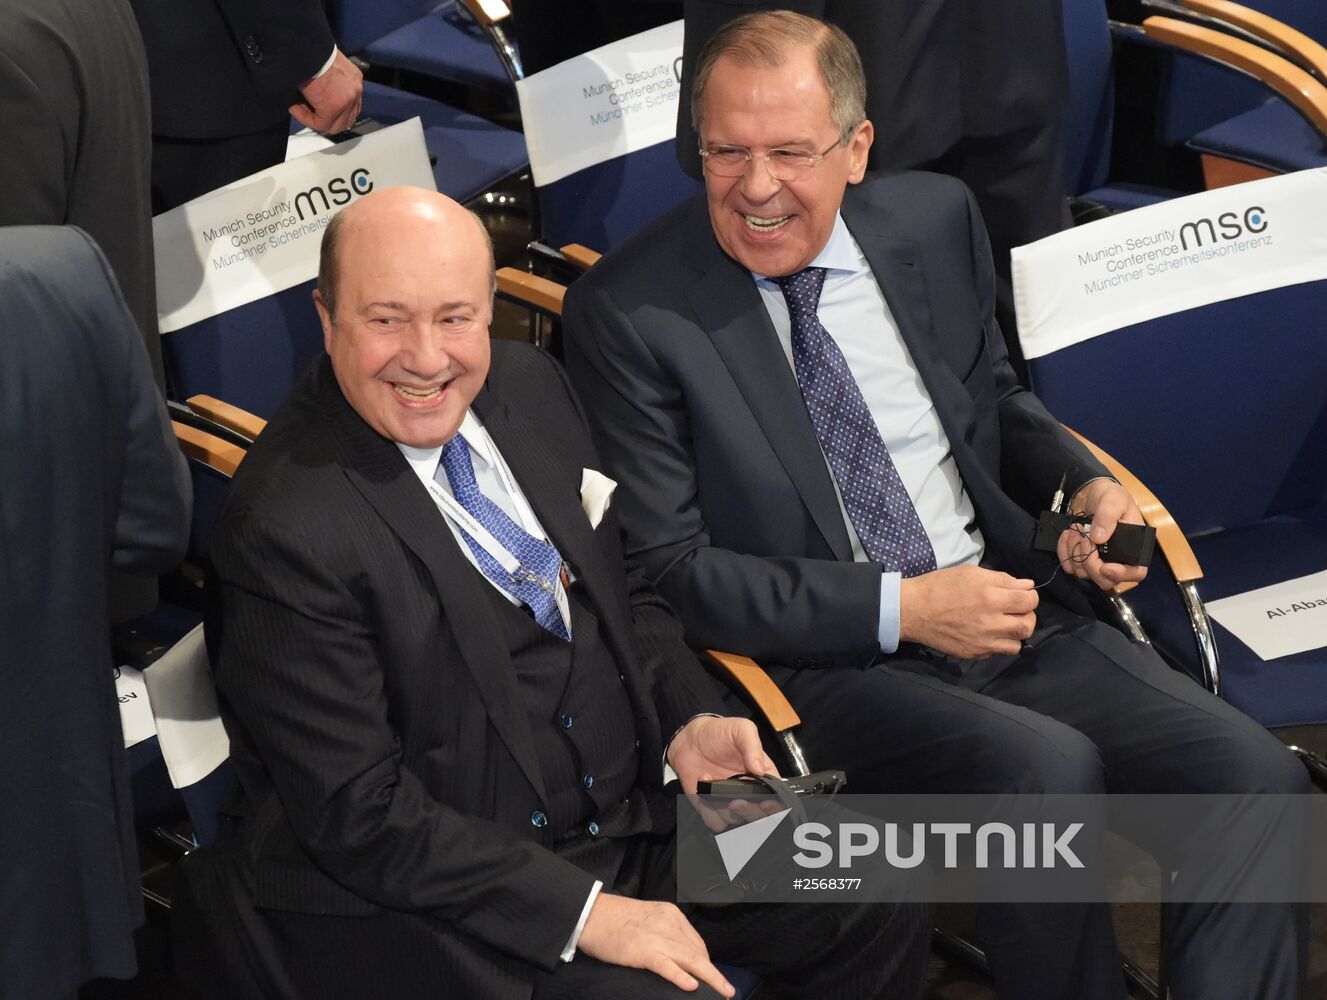 Russian Foreign Minister Sergei Lavrov takes part in Munich Security Conference